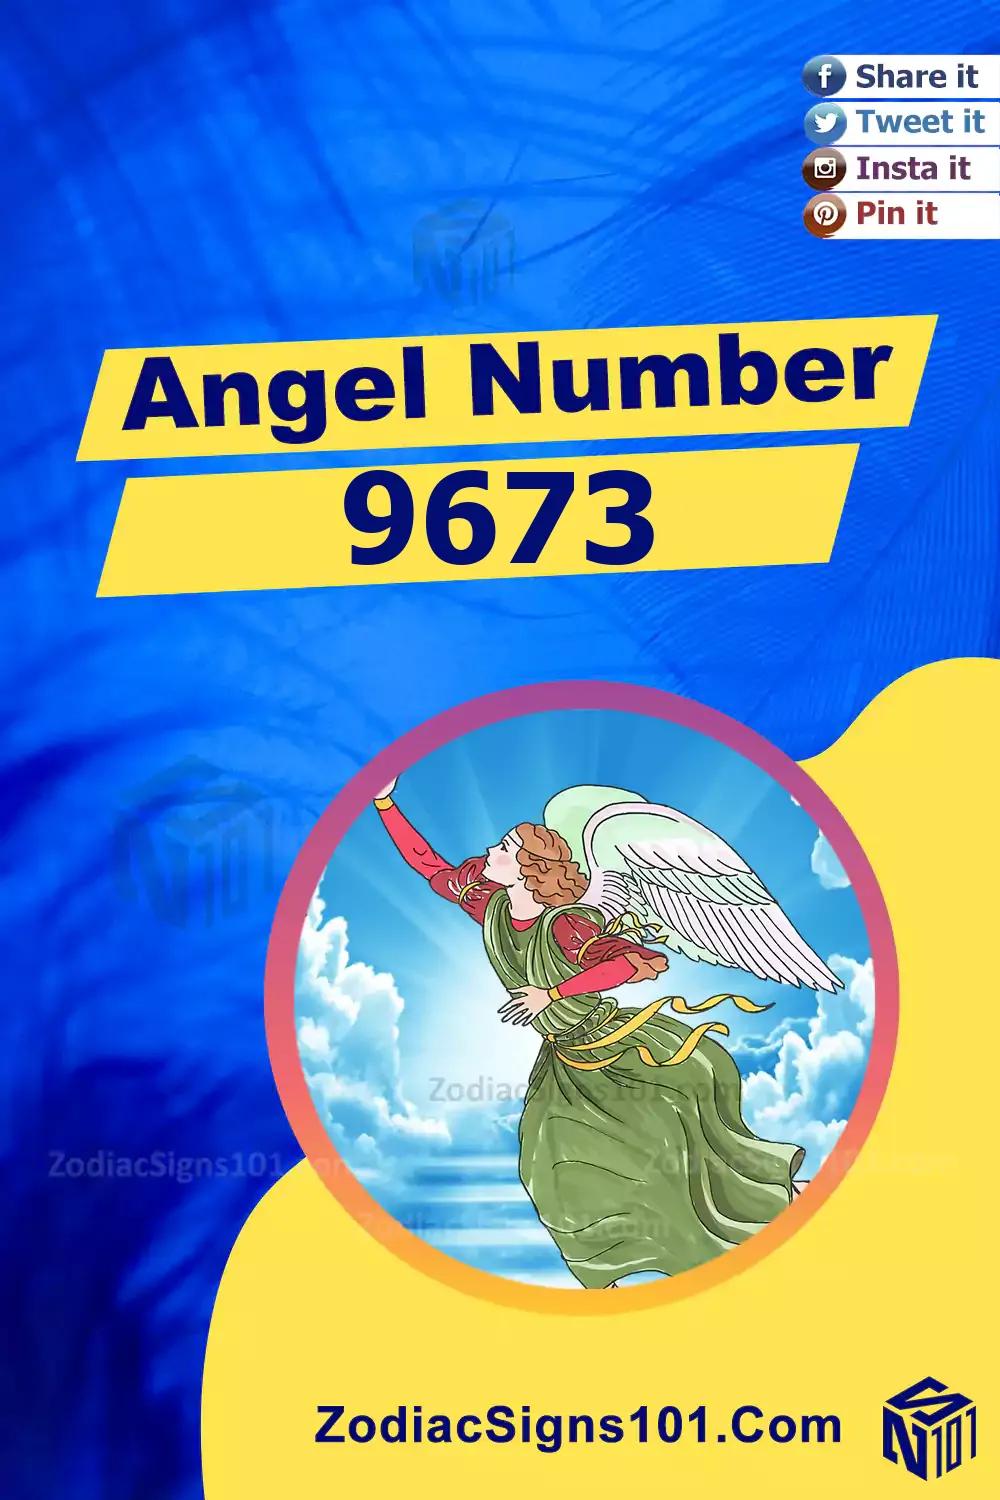 9673 Angel Number Meaning